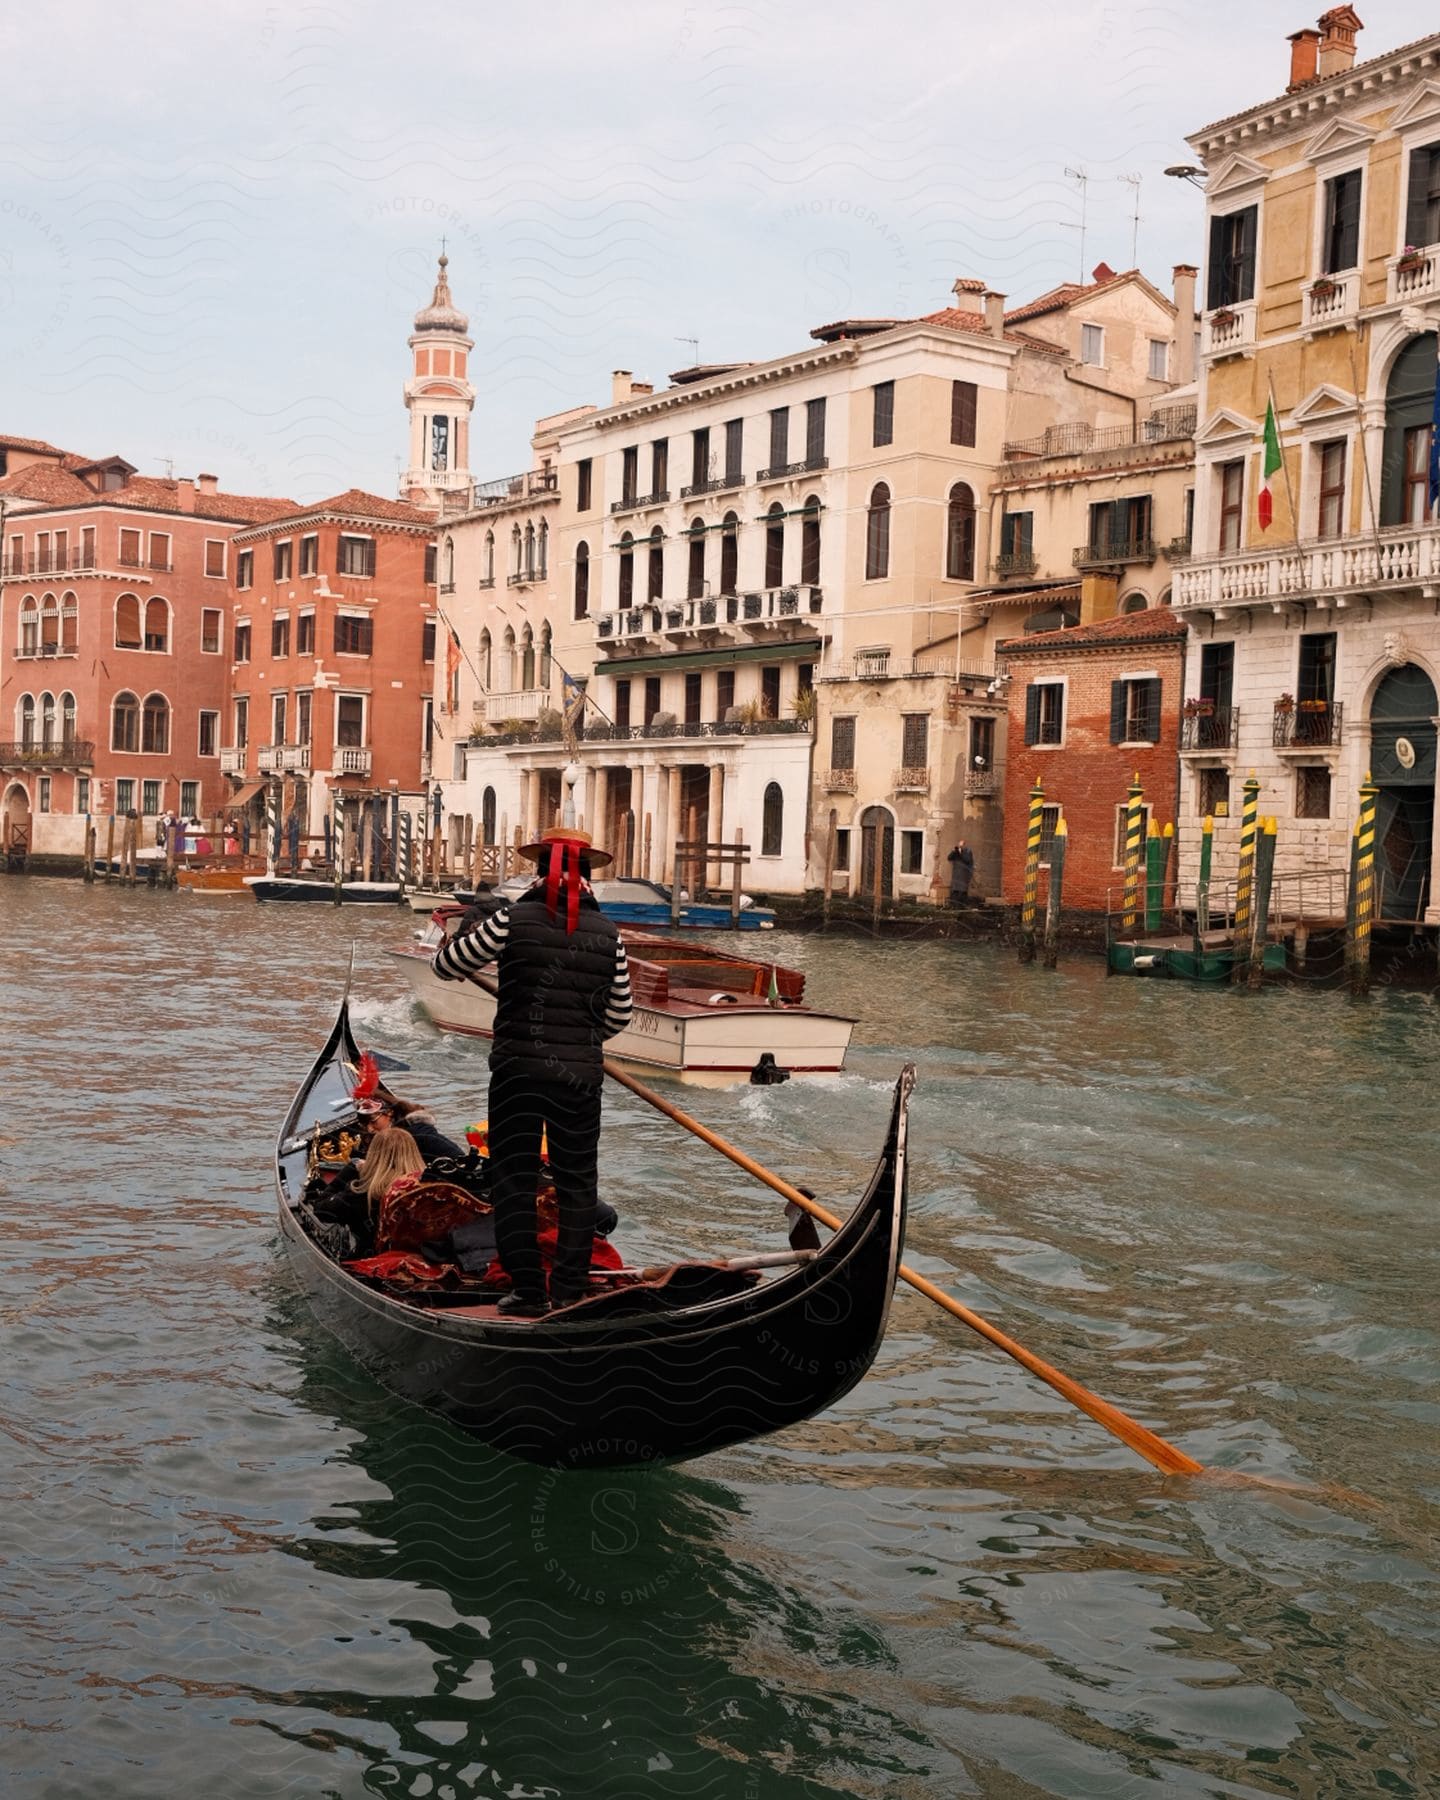 People in a gondola floating on a channel in Venice.